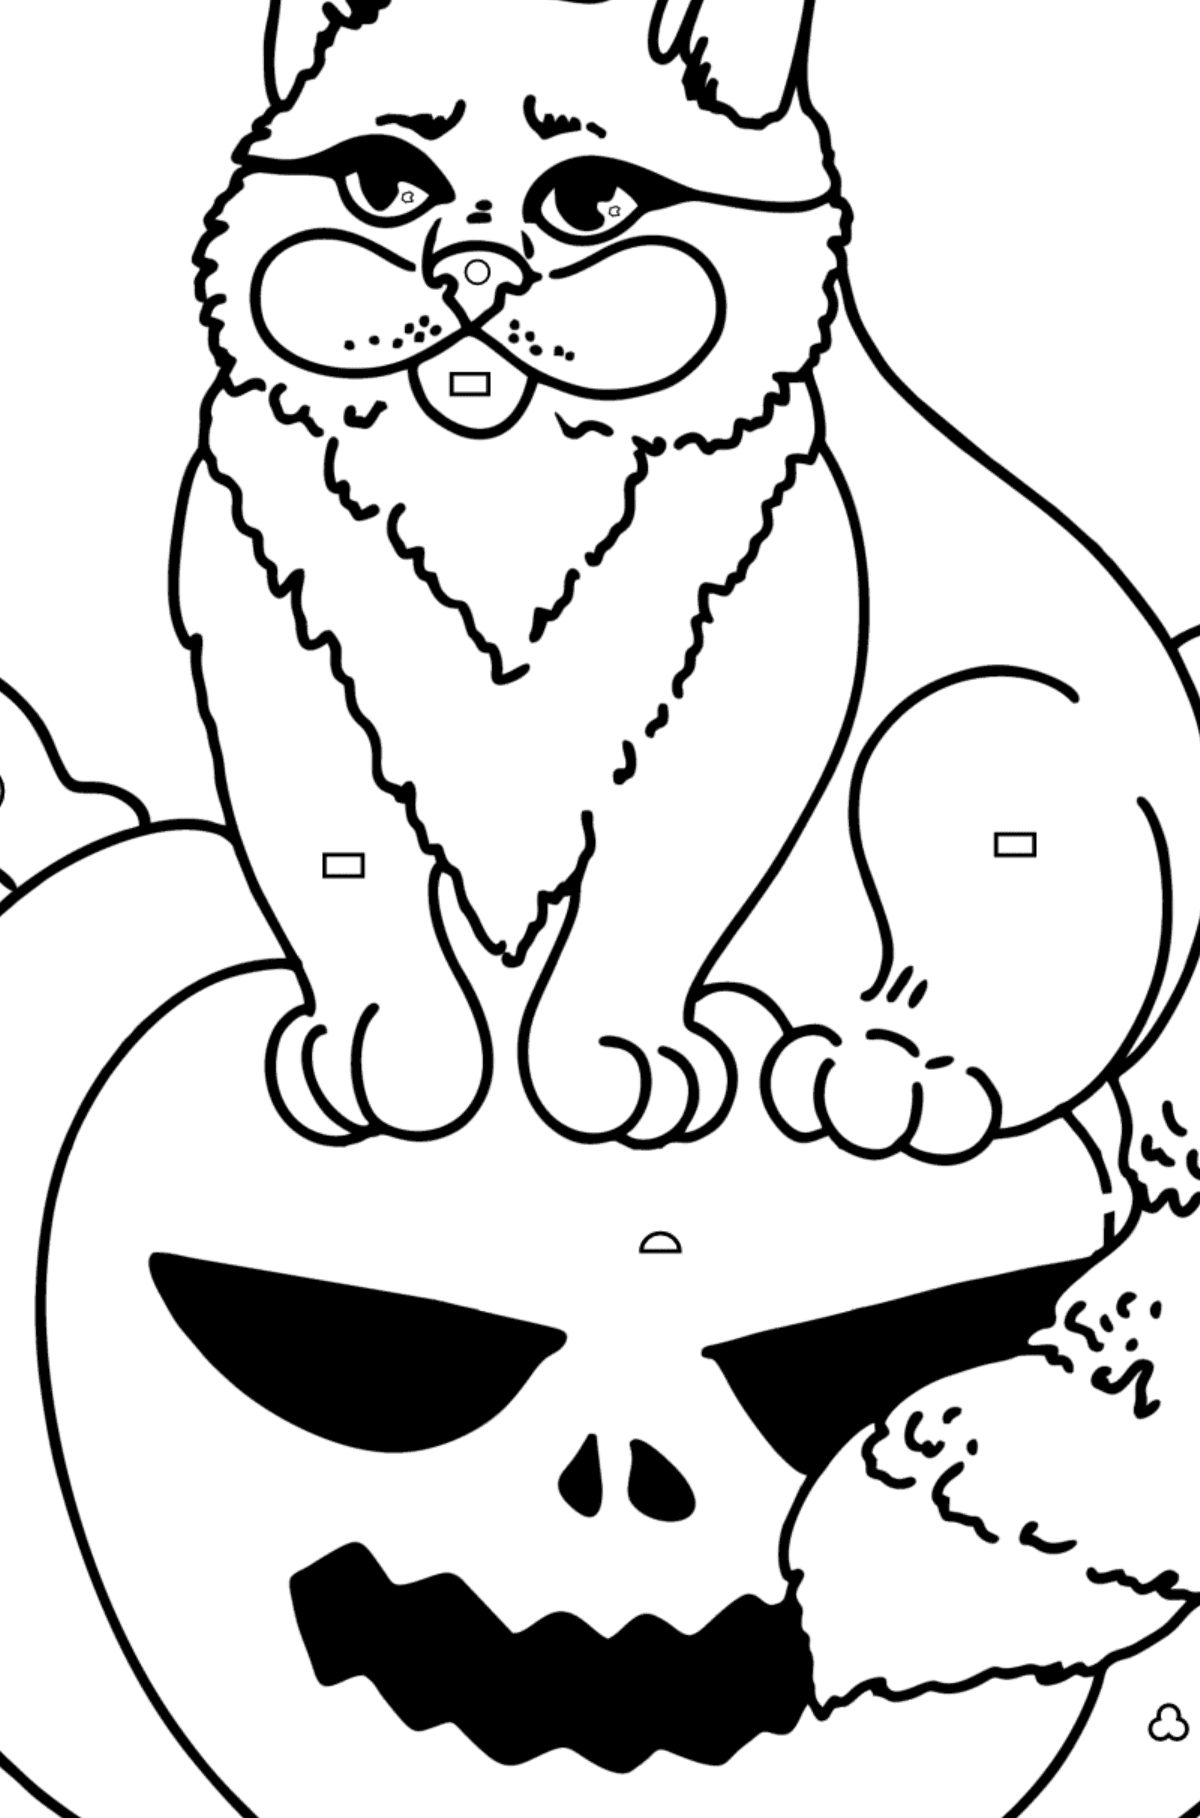 Halloween Cat coloring page - Coloring by Geometric Shapes for Kids